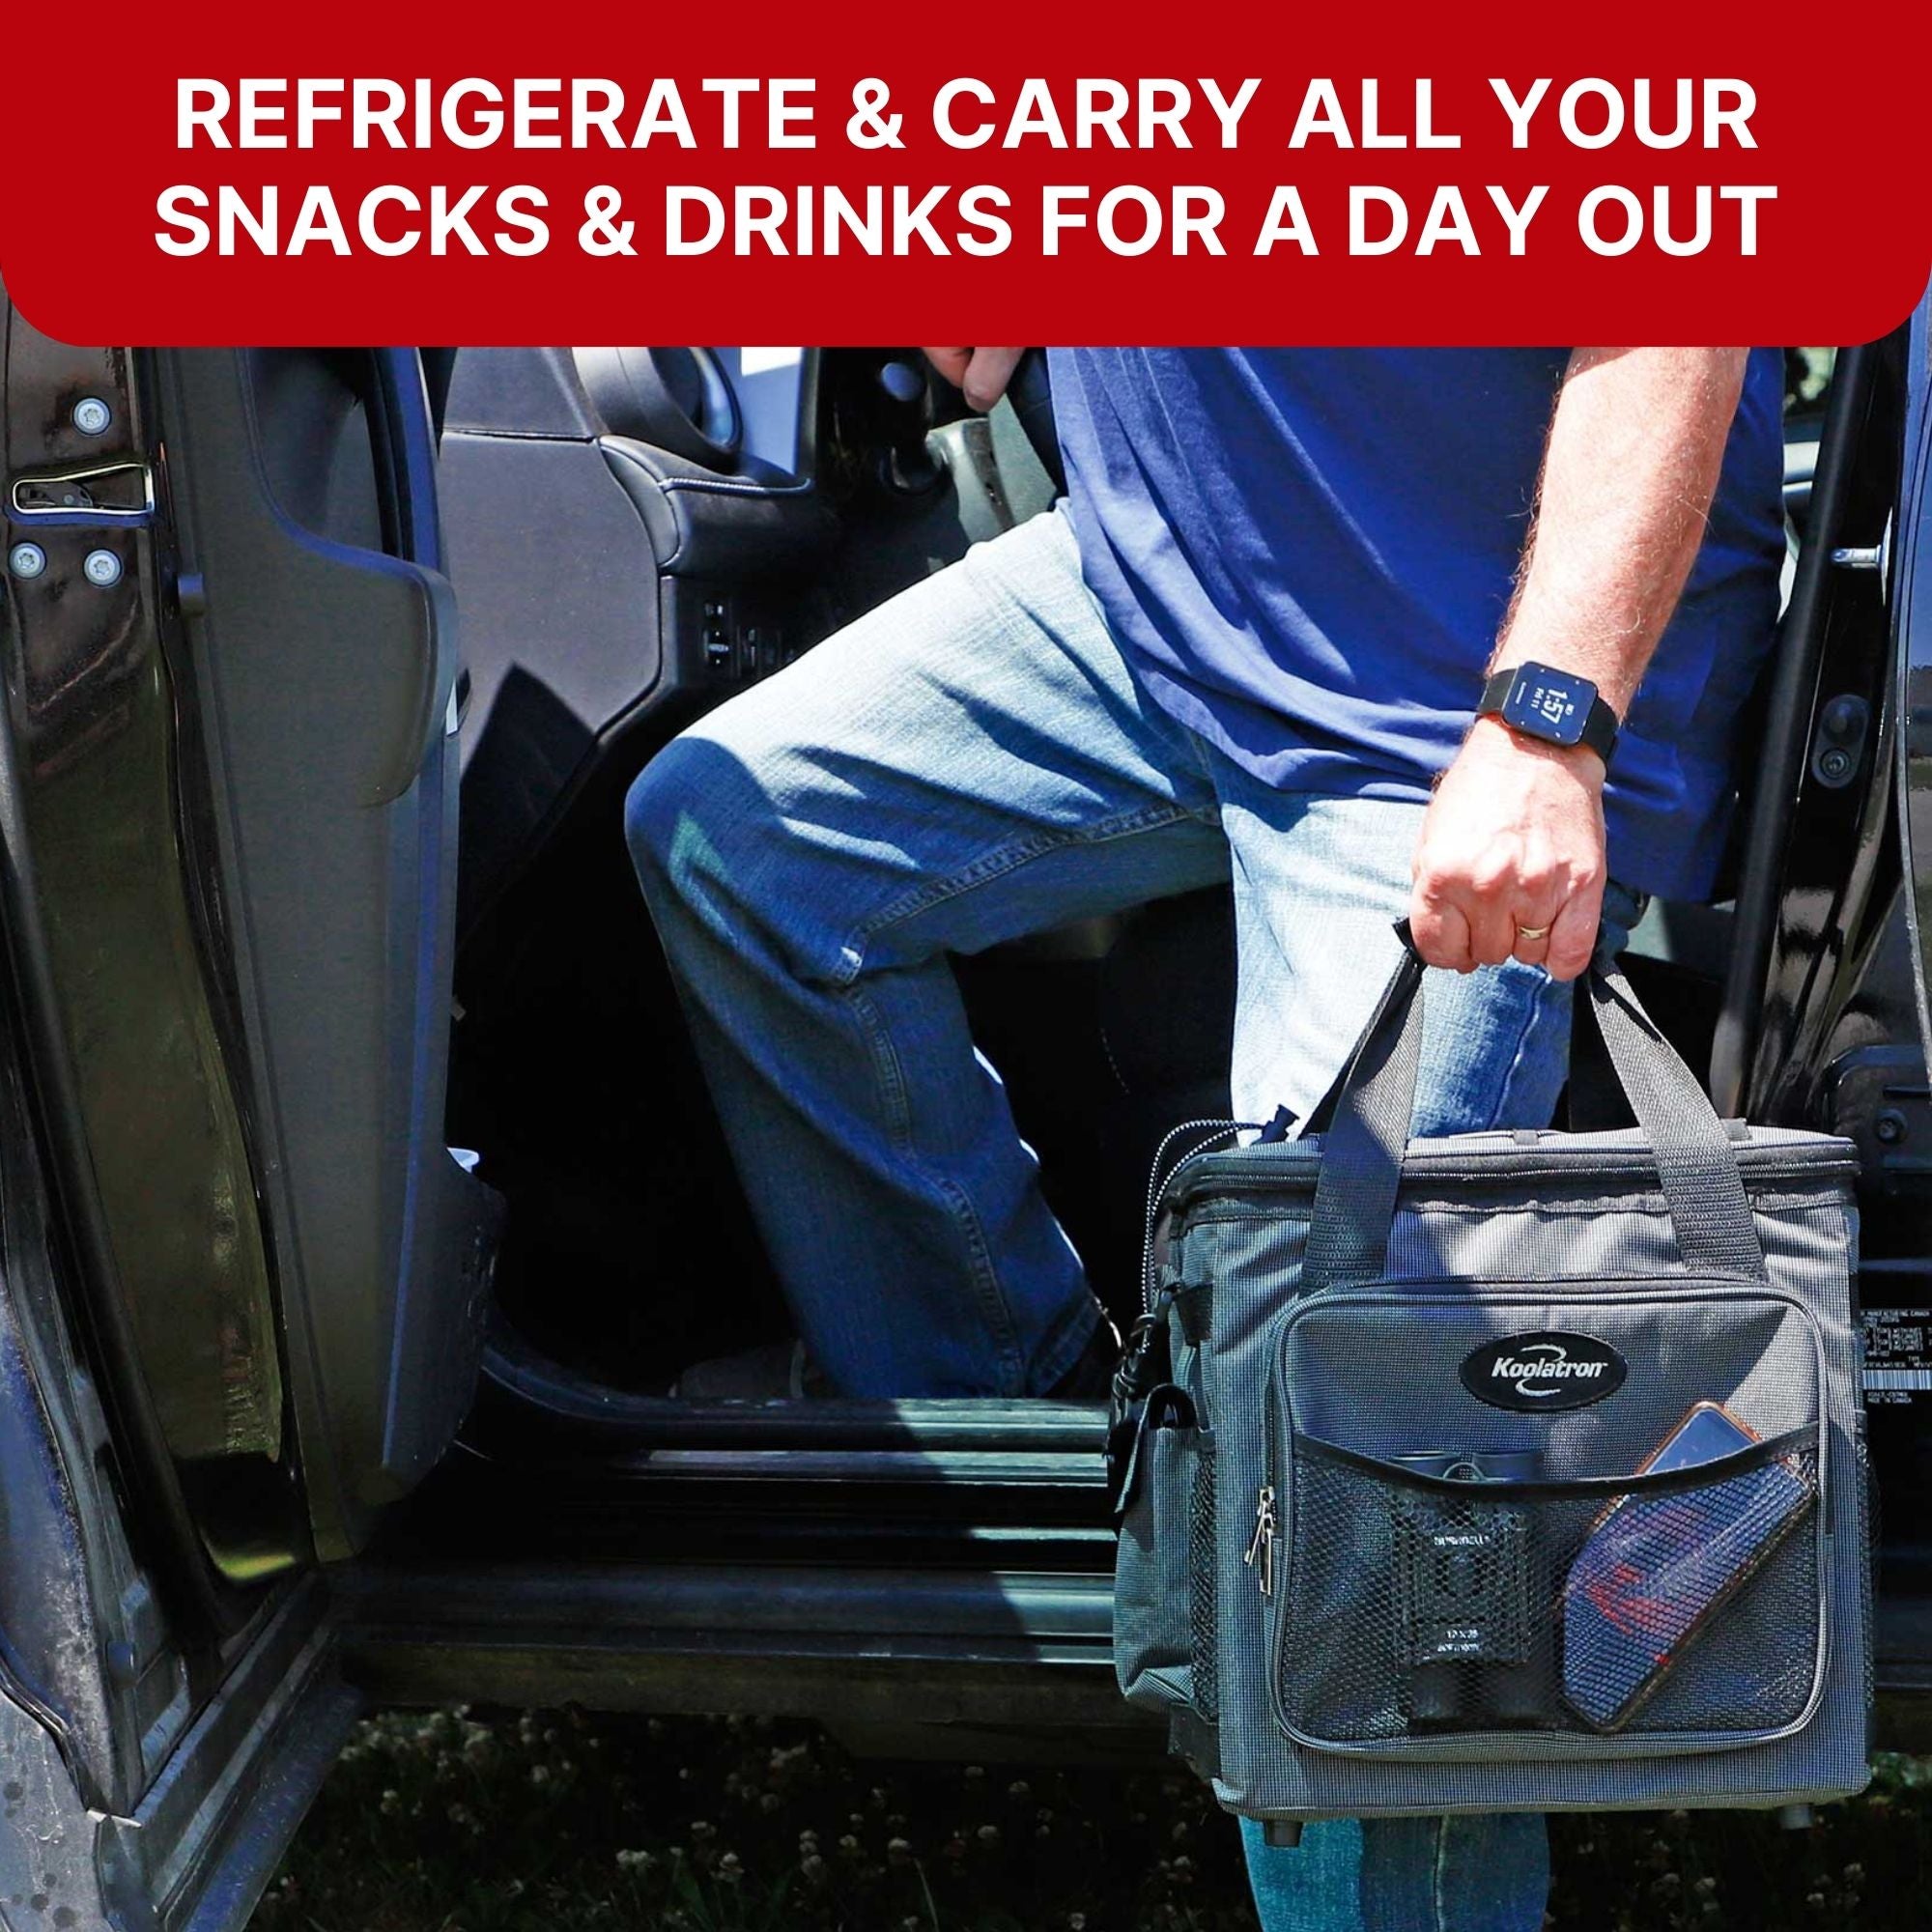 A person holding the Koolatron 12V cooler bag by the handles stepping into a pickup truck. Text above reads, "REFRIGERATE AND CARRY ALL YOUR SNACKS AND DRINKS FOR A DAY OUT"